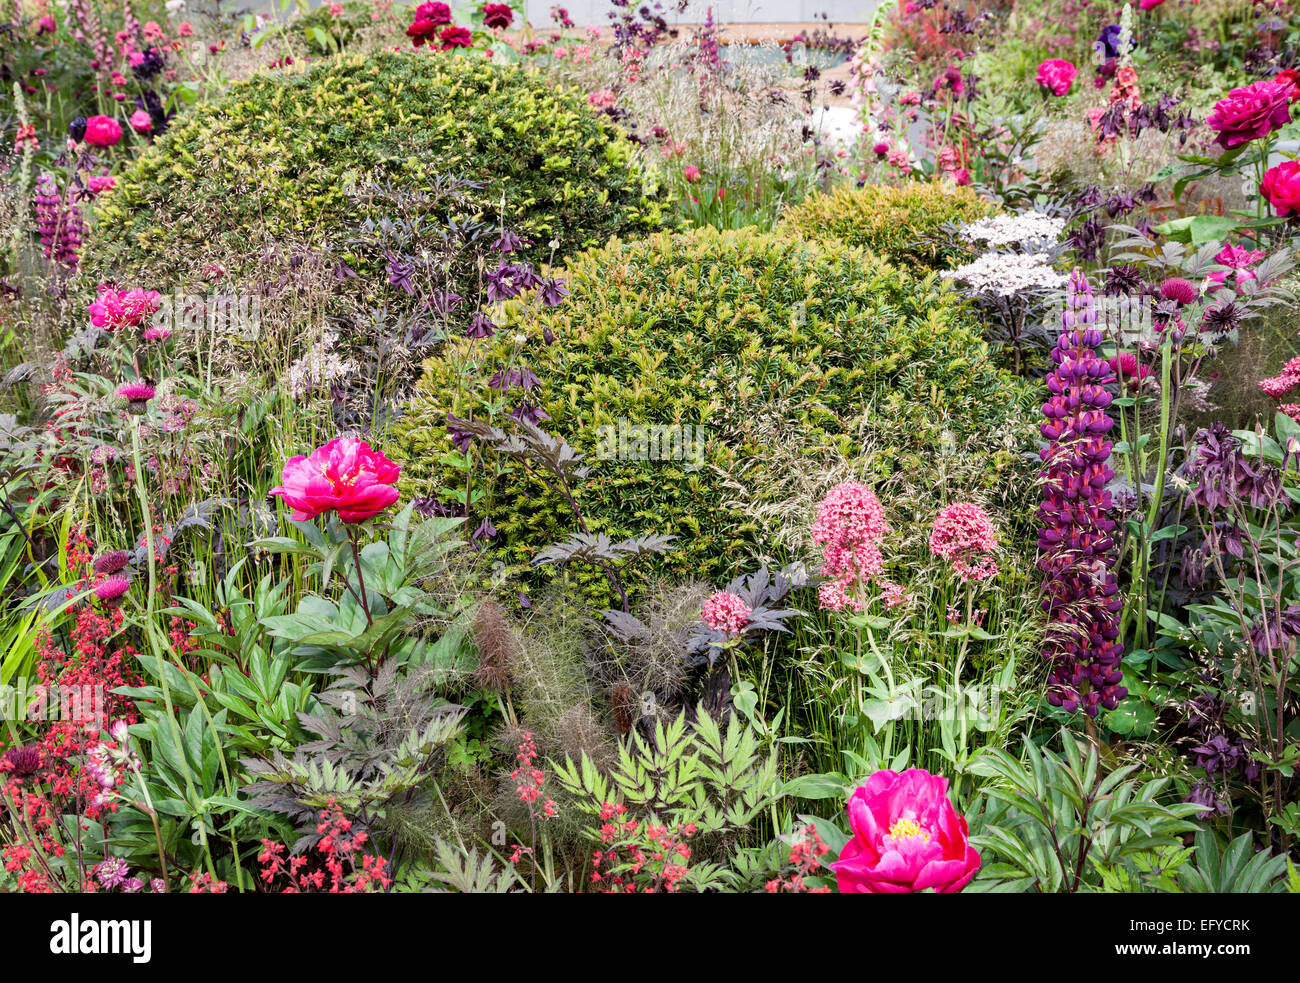 Ball shaped yews surrounded by pink and purple flowering shrubs and perennials Stock Photo